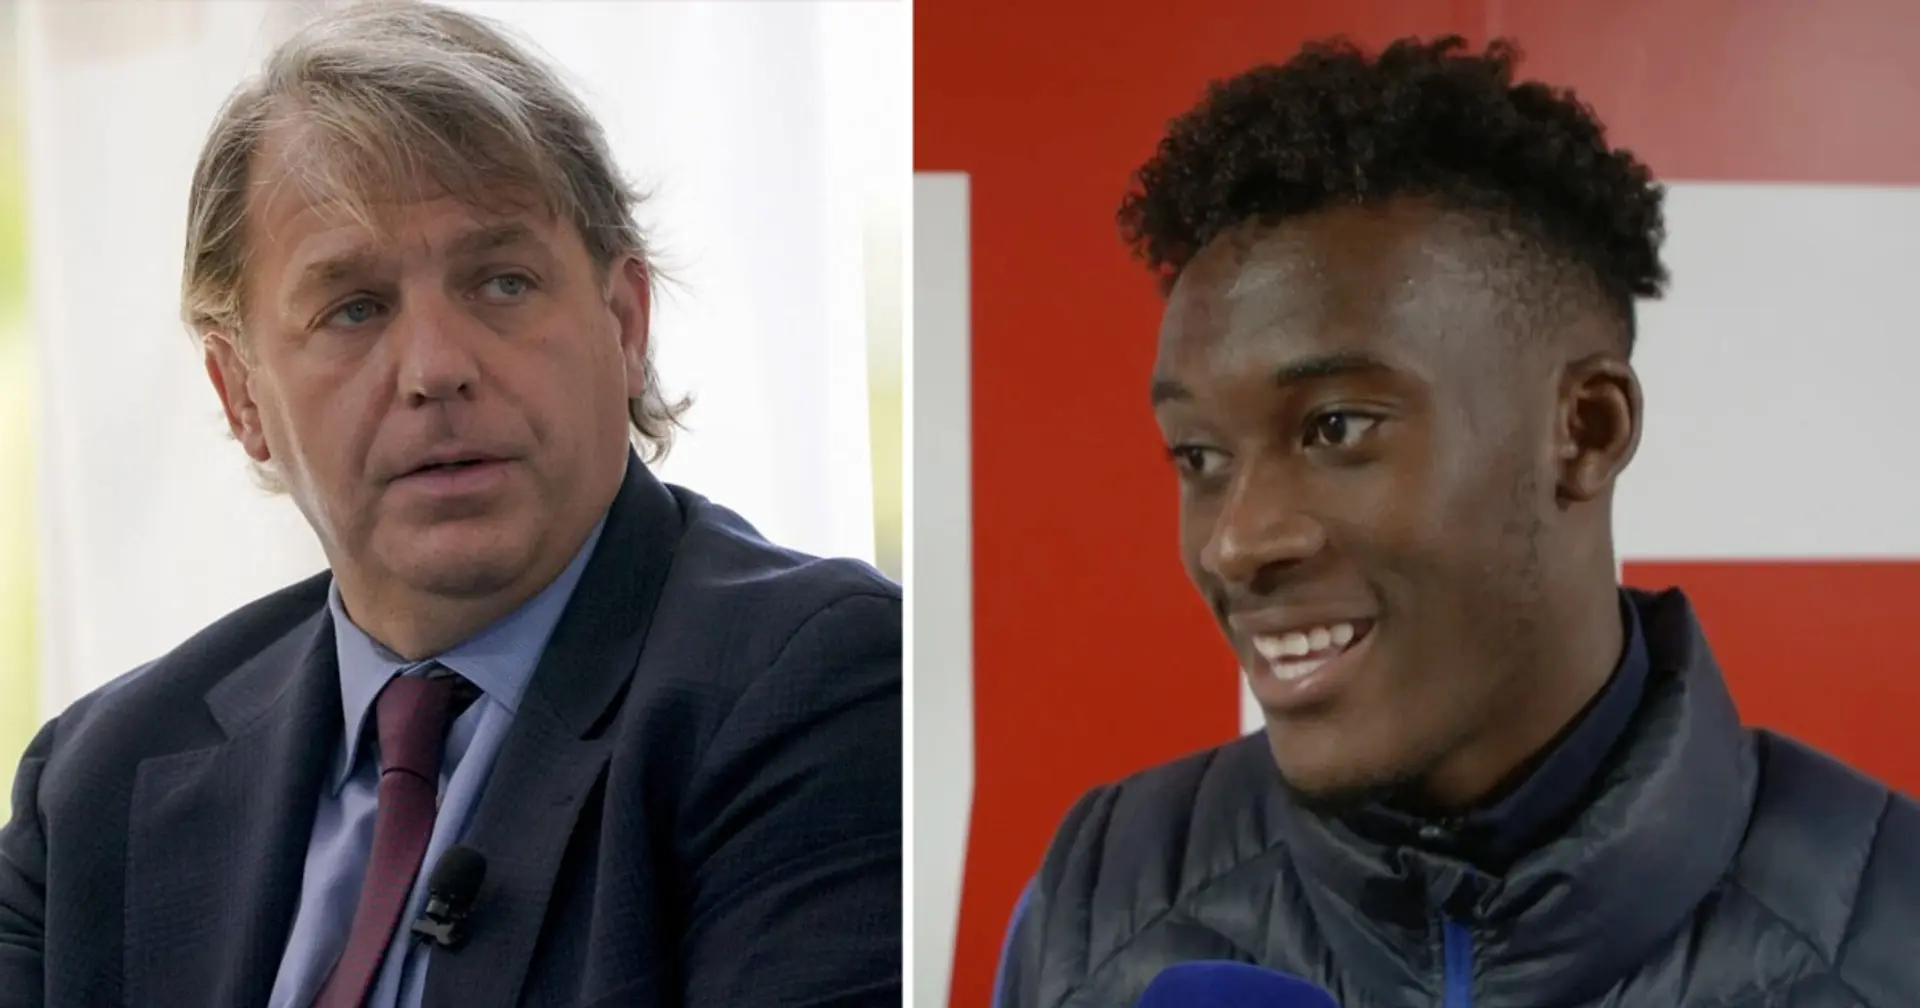 Hudson-Odoi reveals Boehly's message before Leverkusen loan - it's about his future